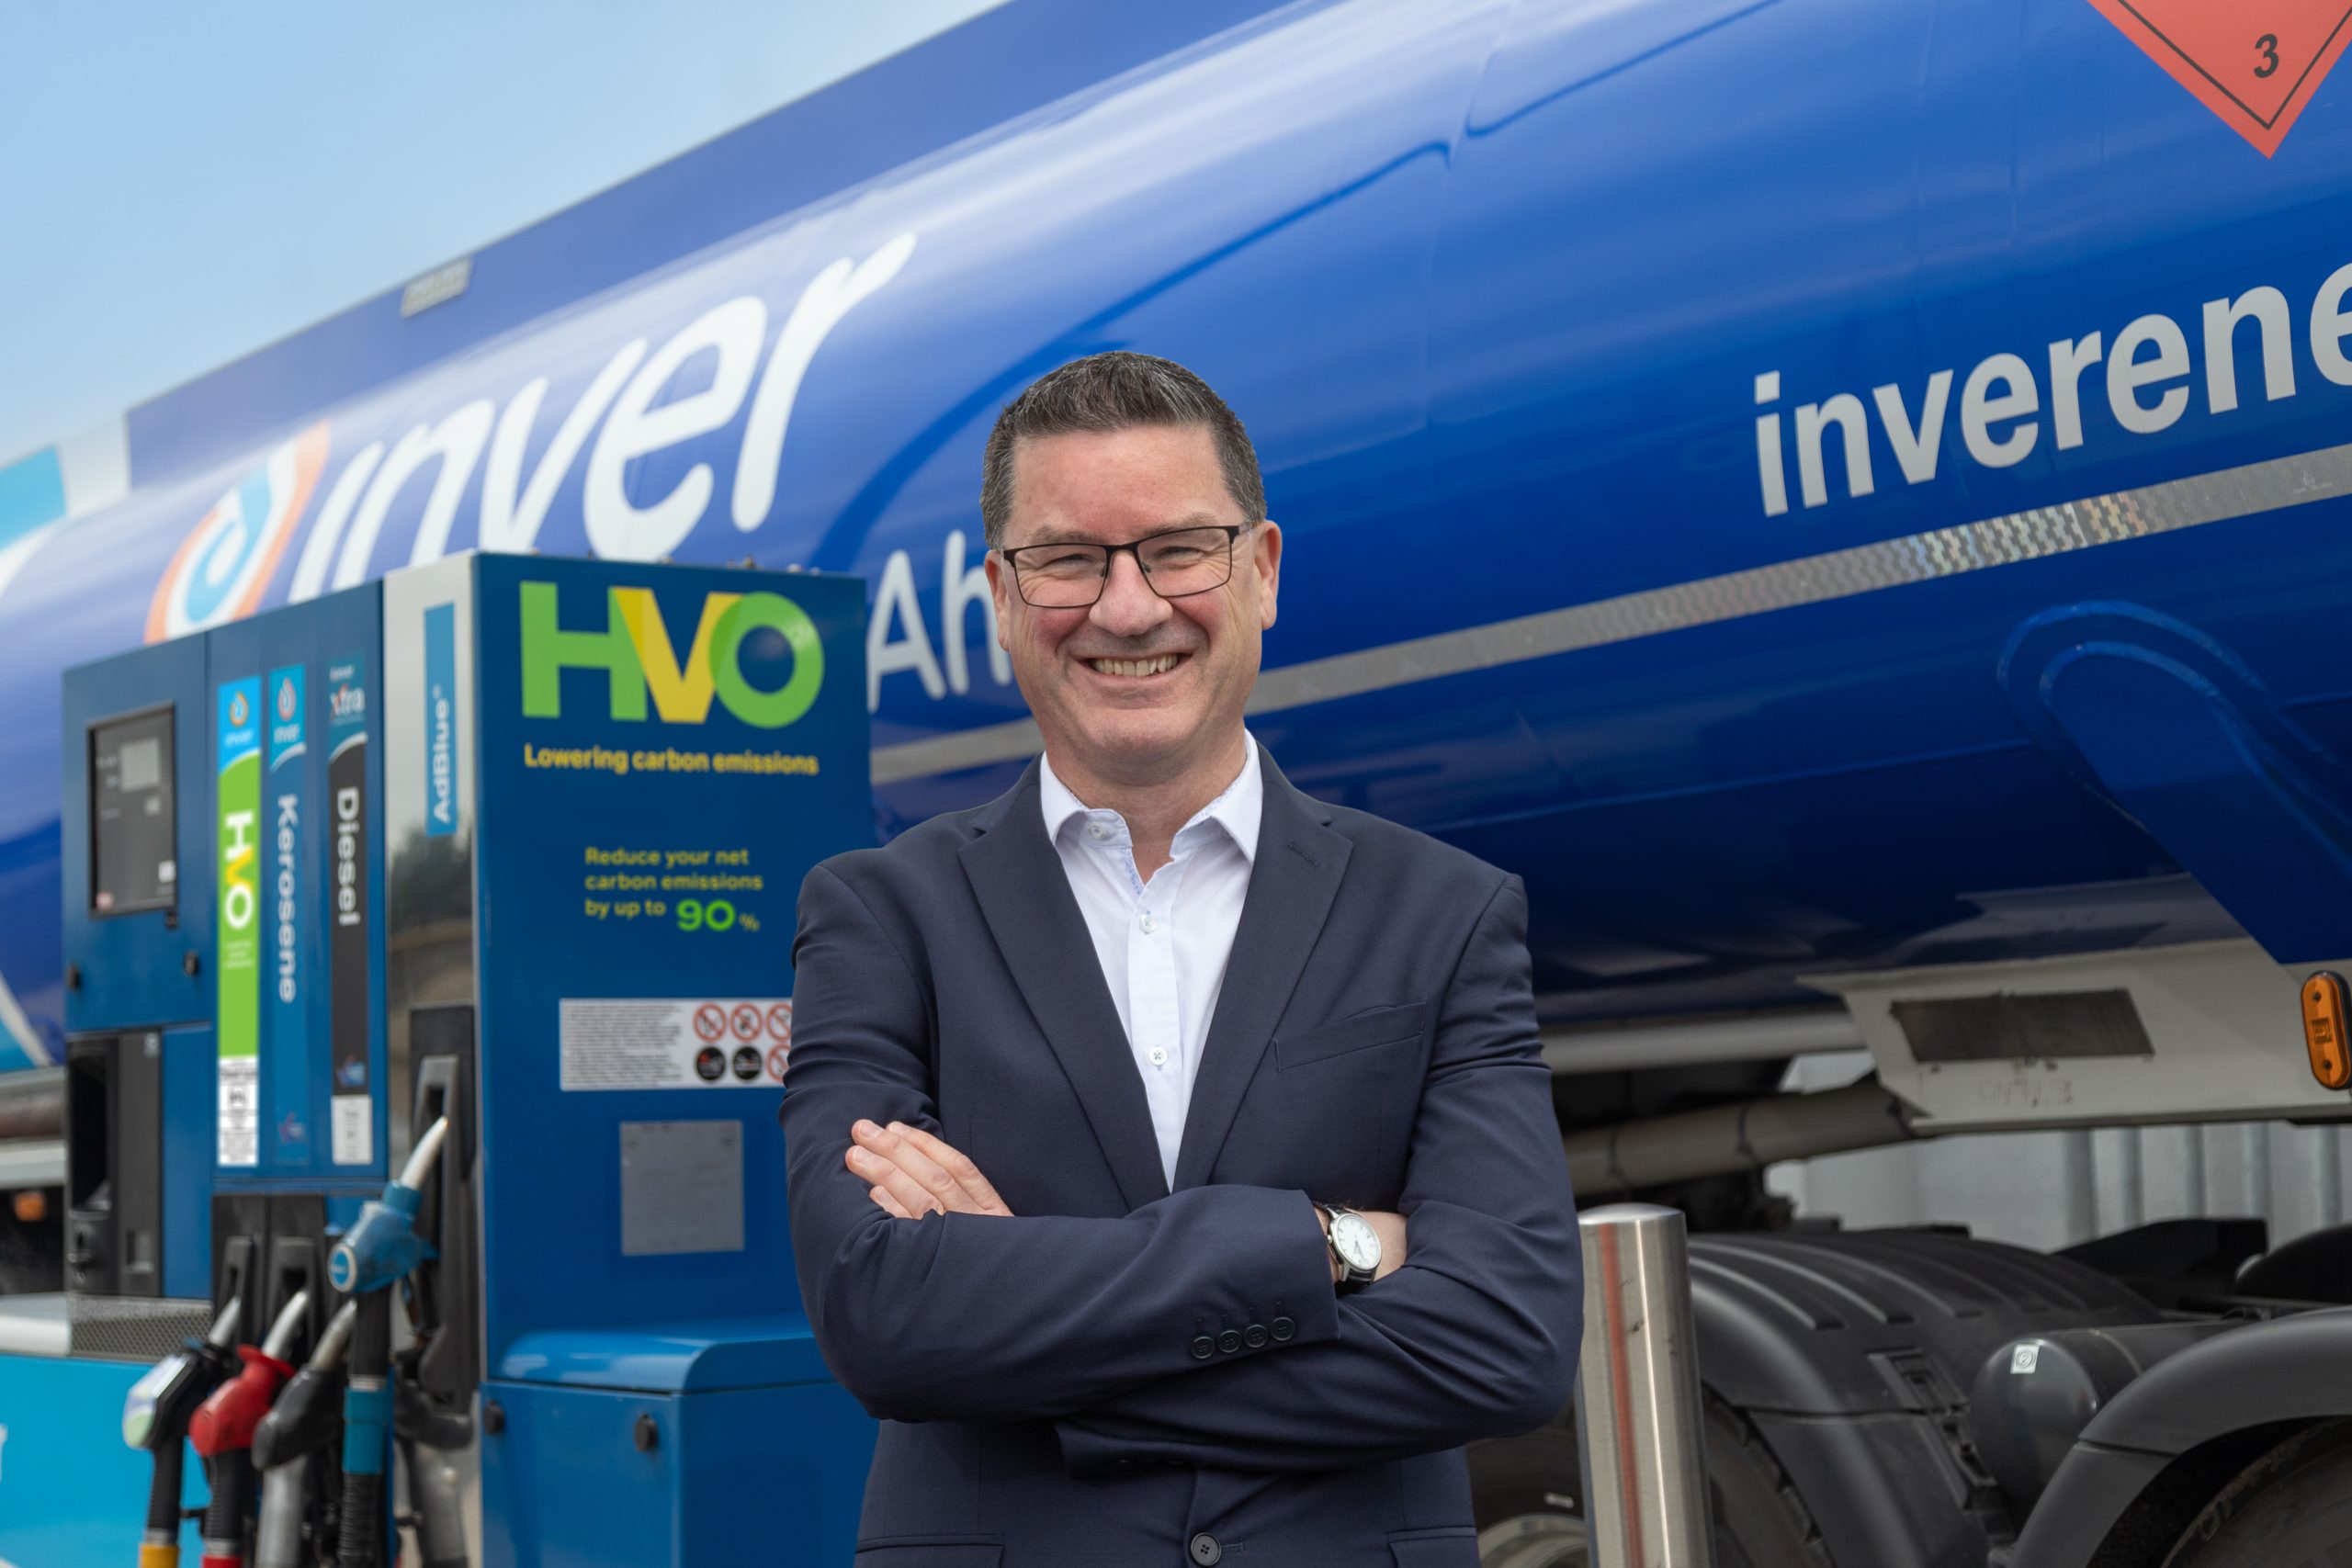 Inver Energy rolls out HVO at selected forecourts